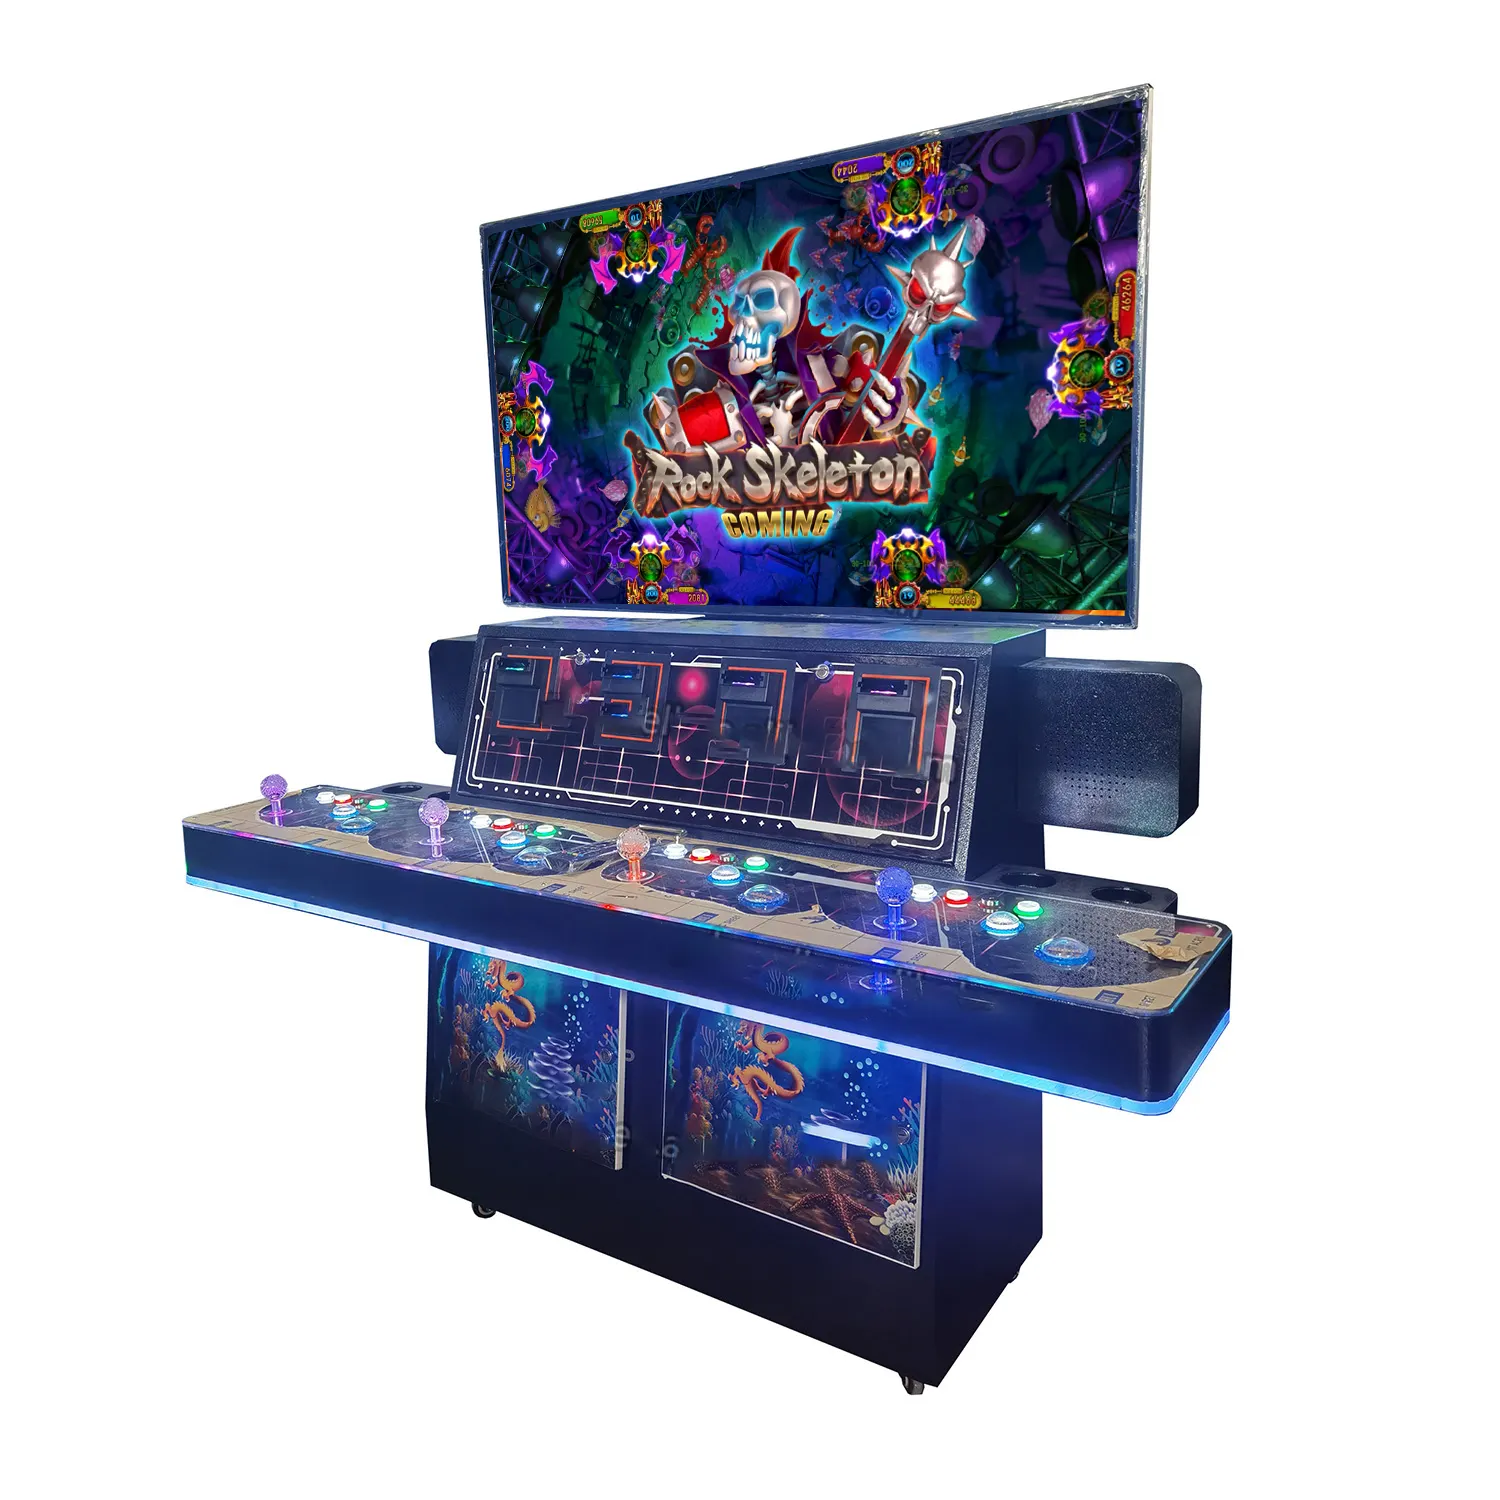 2022 Hot Sale Standing 4 player standing fish game Table/Fish Game Machine/Fish Game Cabinet